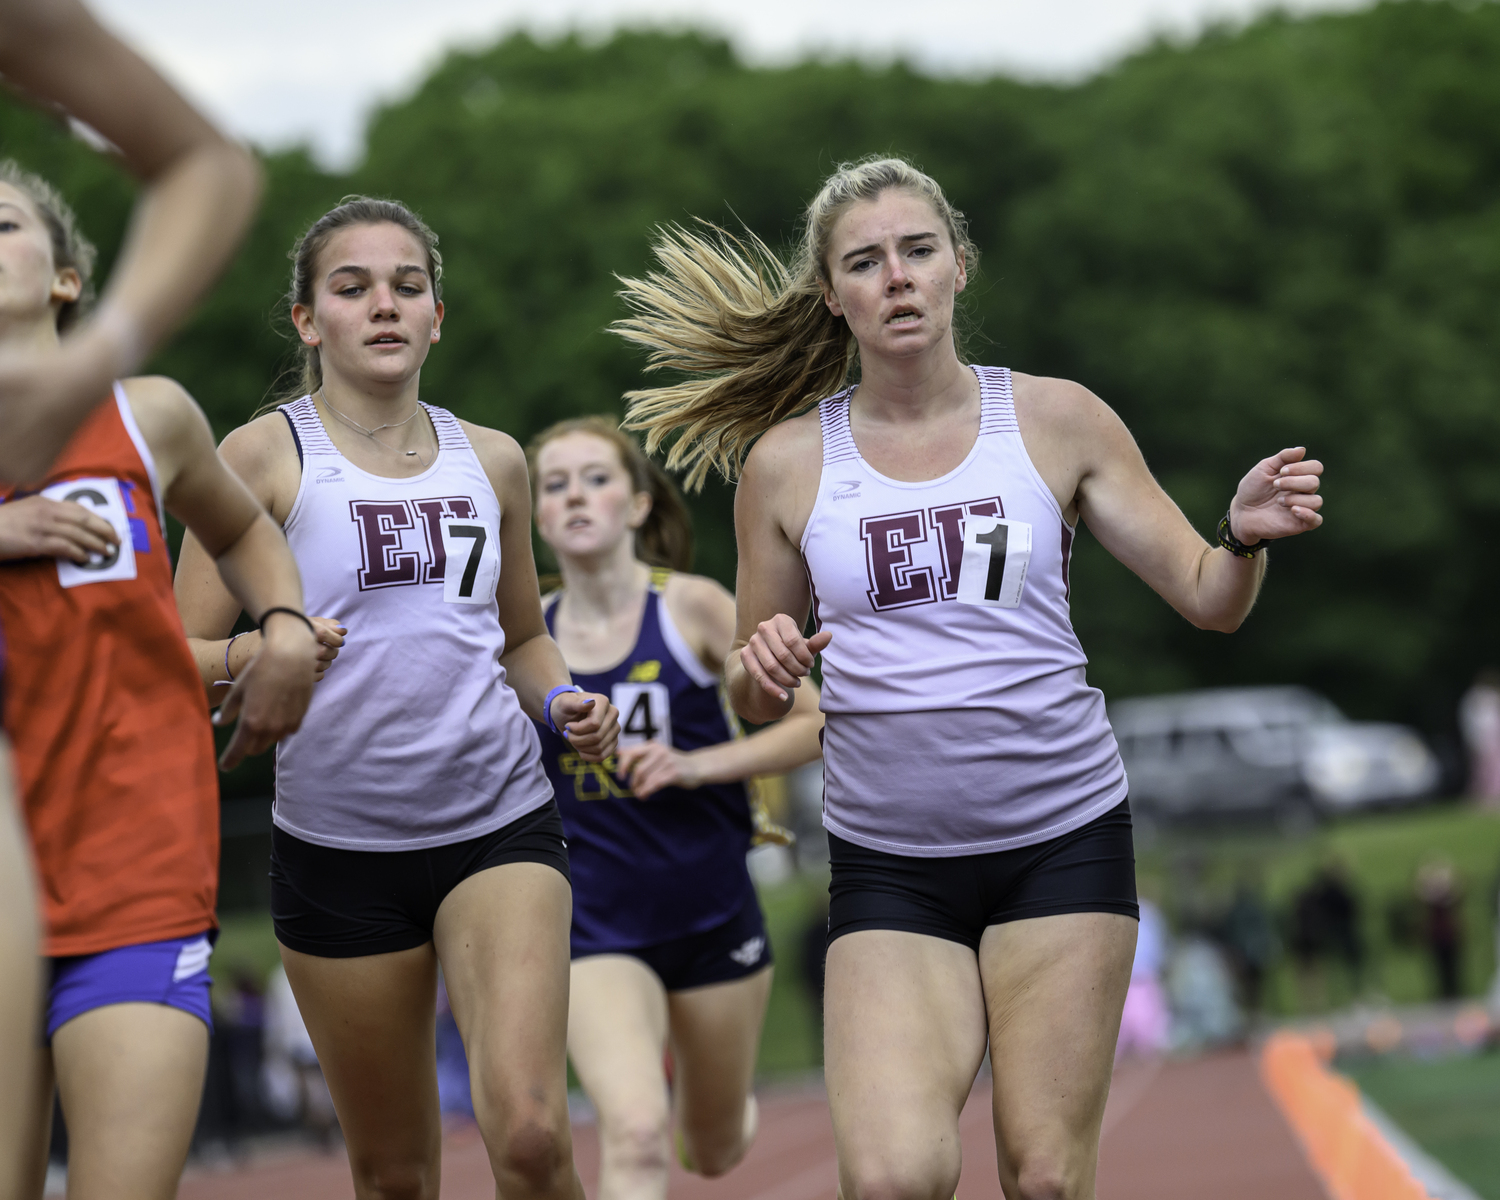 Bonac teammates Greylynn Guyer, left, and Ryleigh O'Donnell competing in the 800-meter race together.  MARIANNE BARNETT